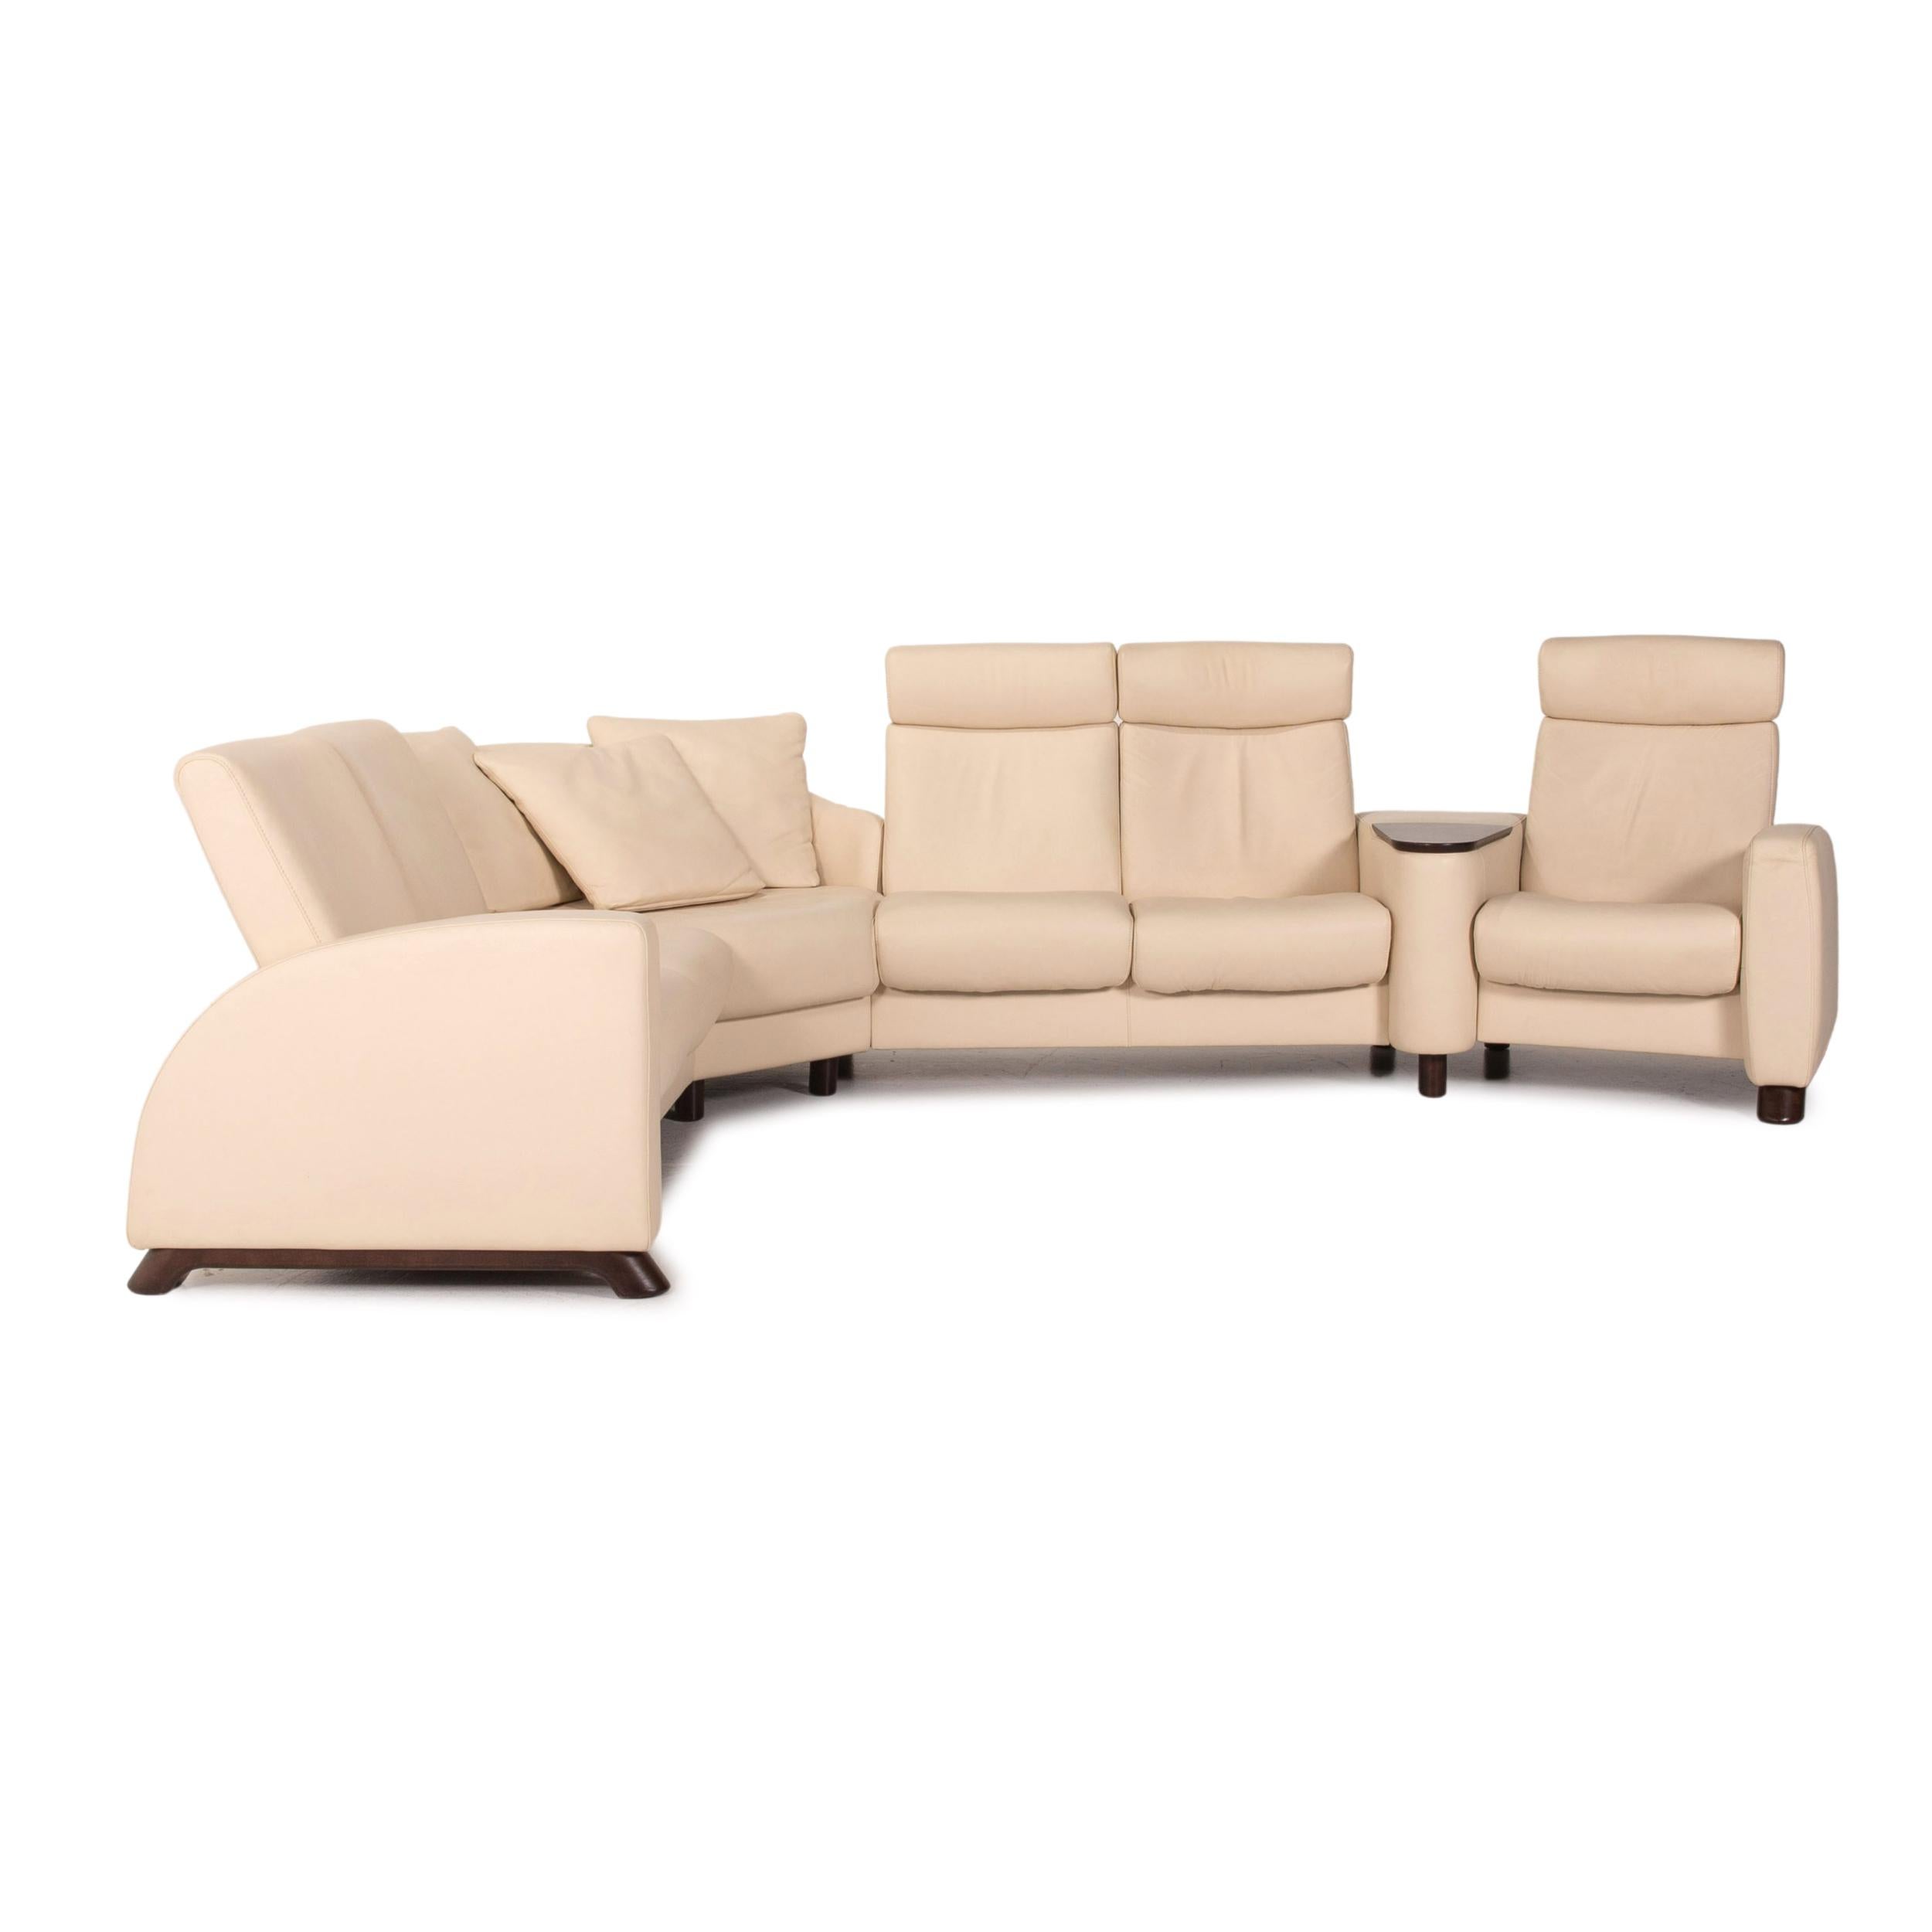 Stressless Arion Leather Corner Sofa Cream Relax Function Sofa Couch For Sale 4